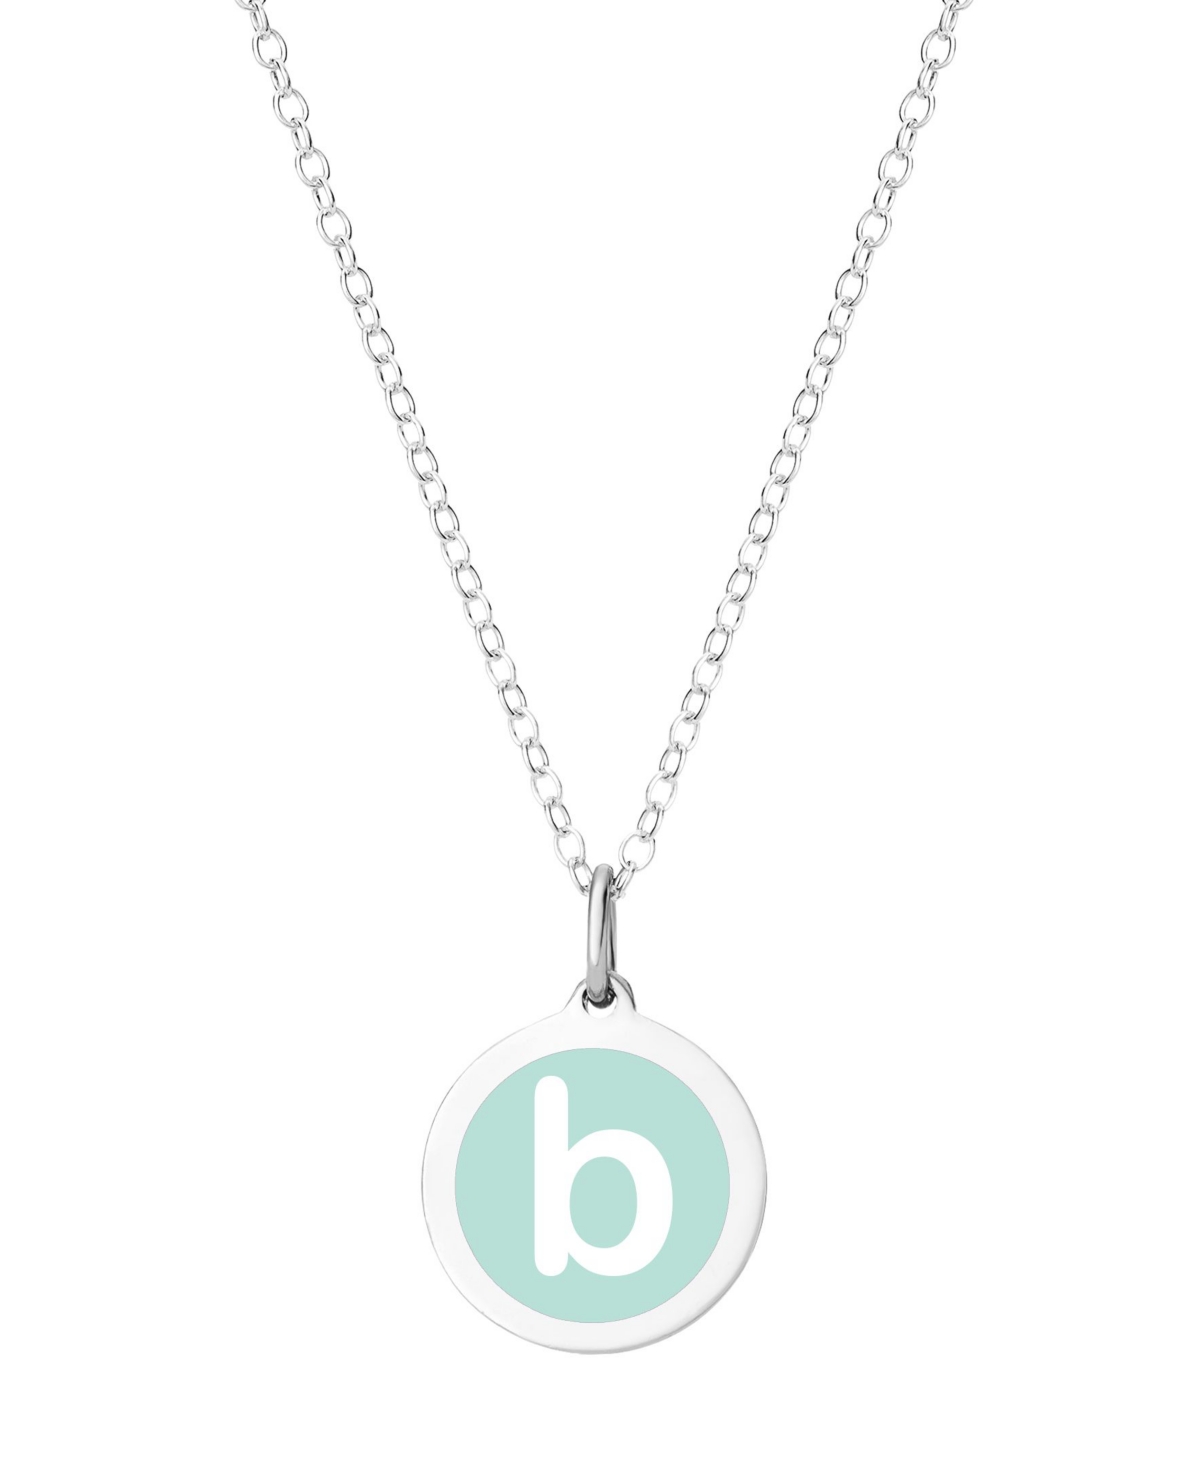 Auburn Jewelry Mini Initial Pendant Necklace in Sterling Silver and Mint Enamel, 16" + 2" Extender